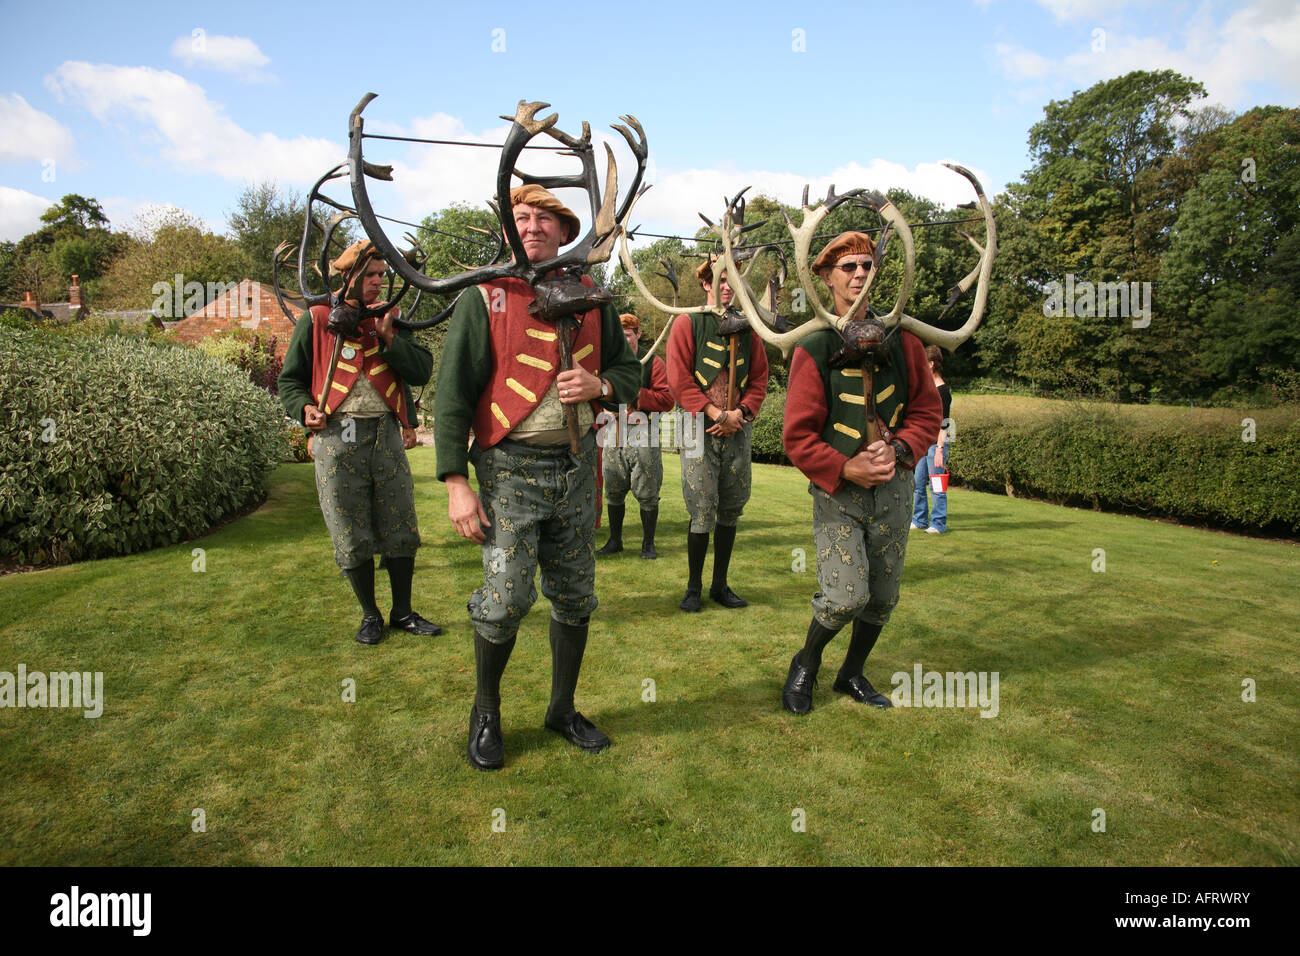 Horn Dance Abbot’s Bromley Staffordshire UK. Stock Photo